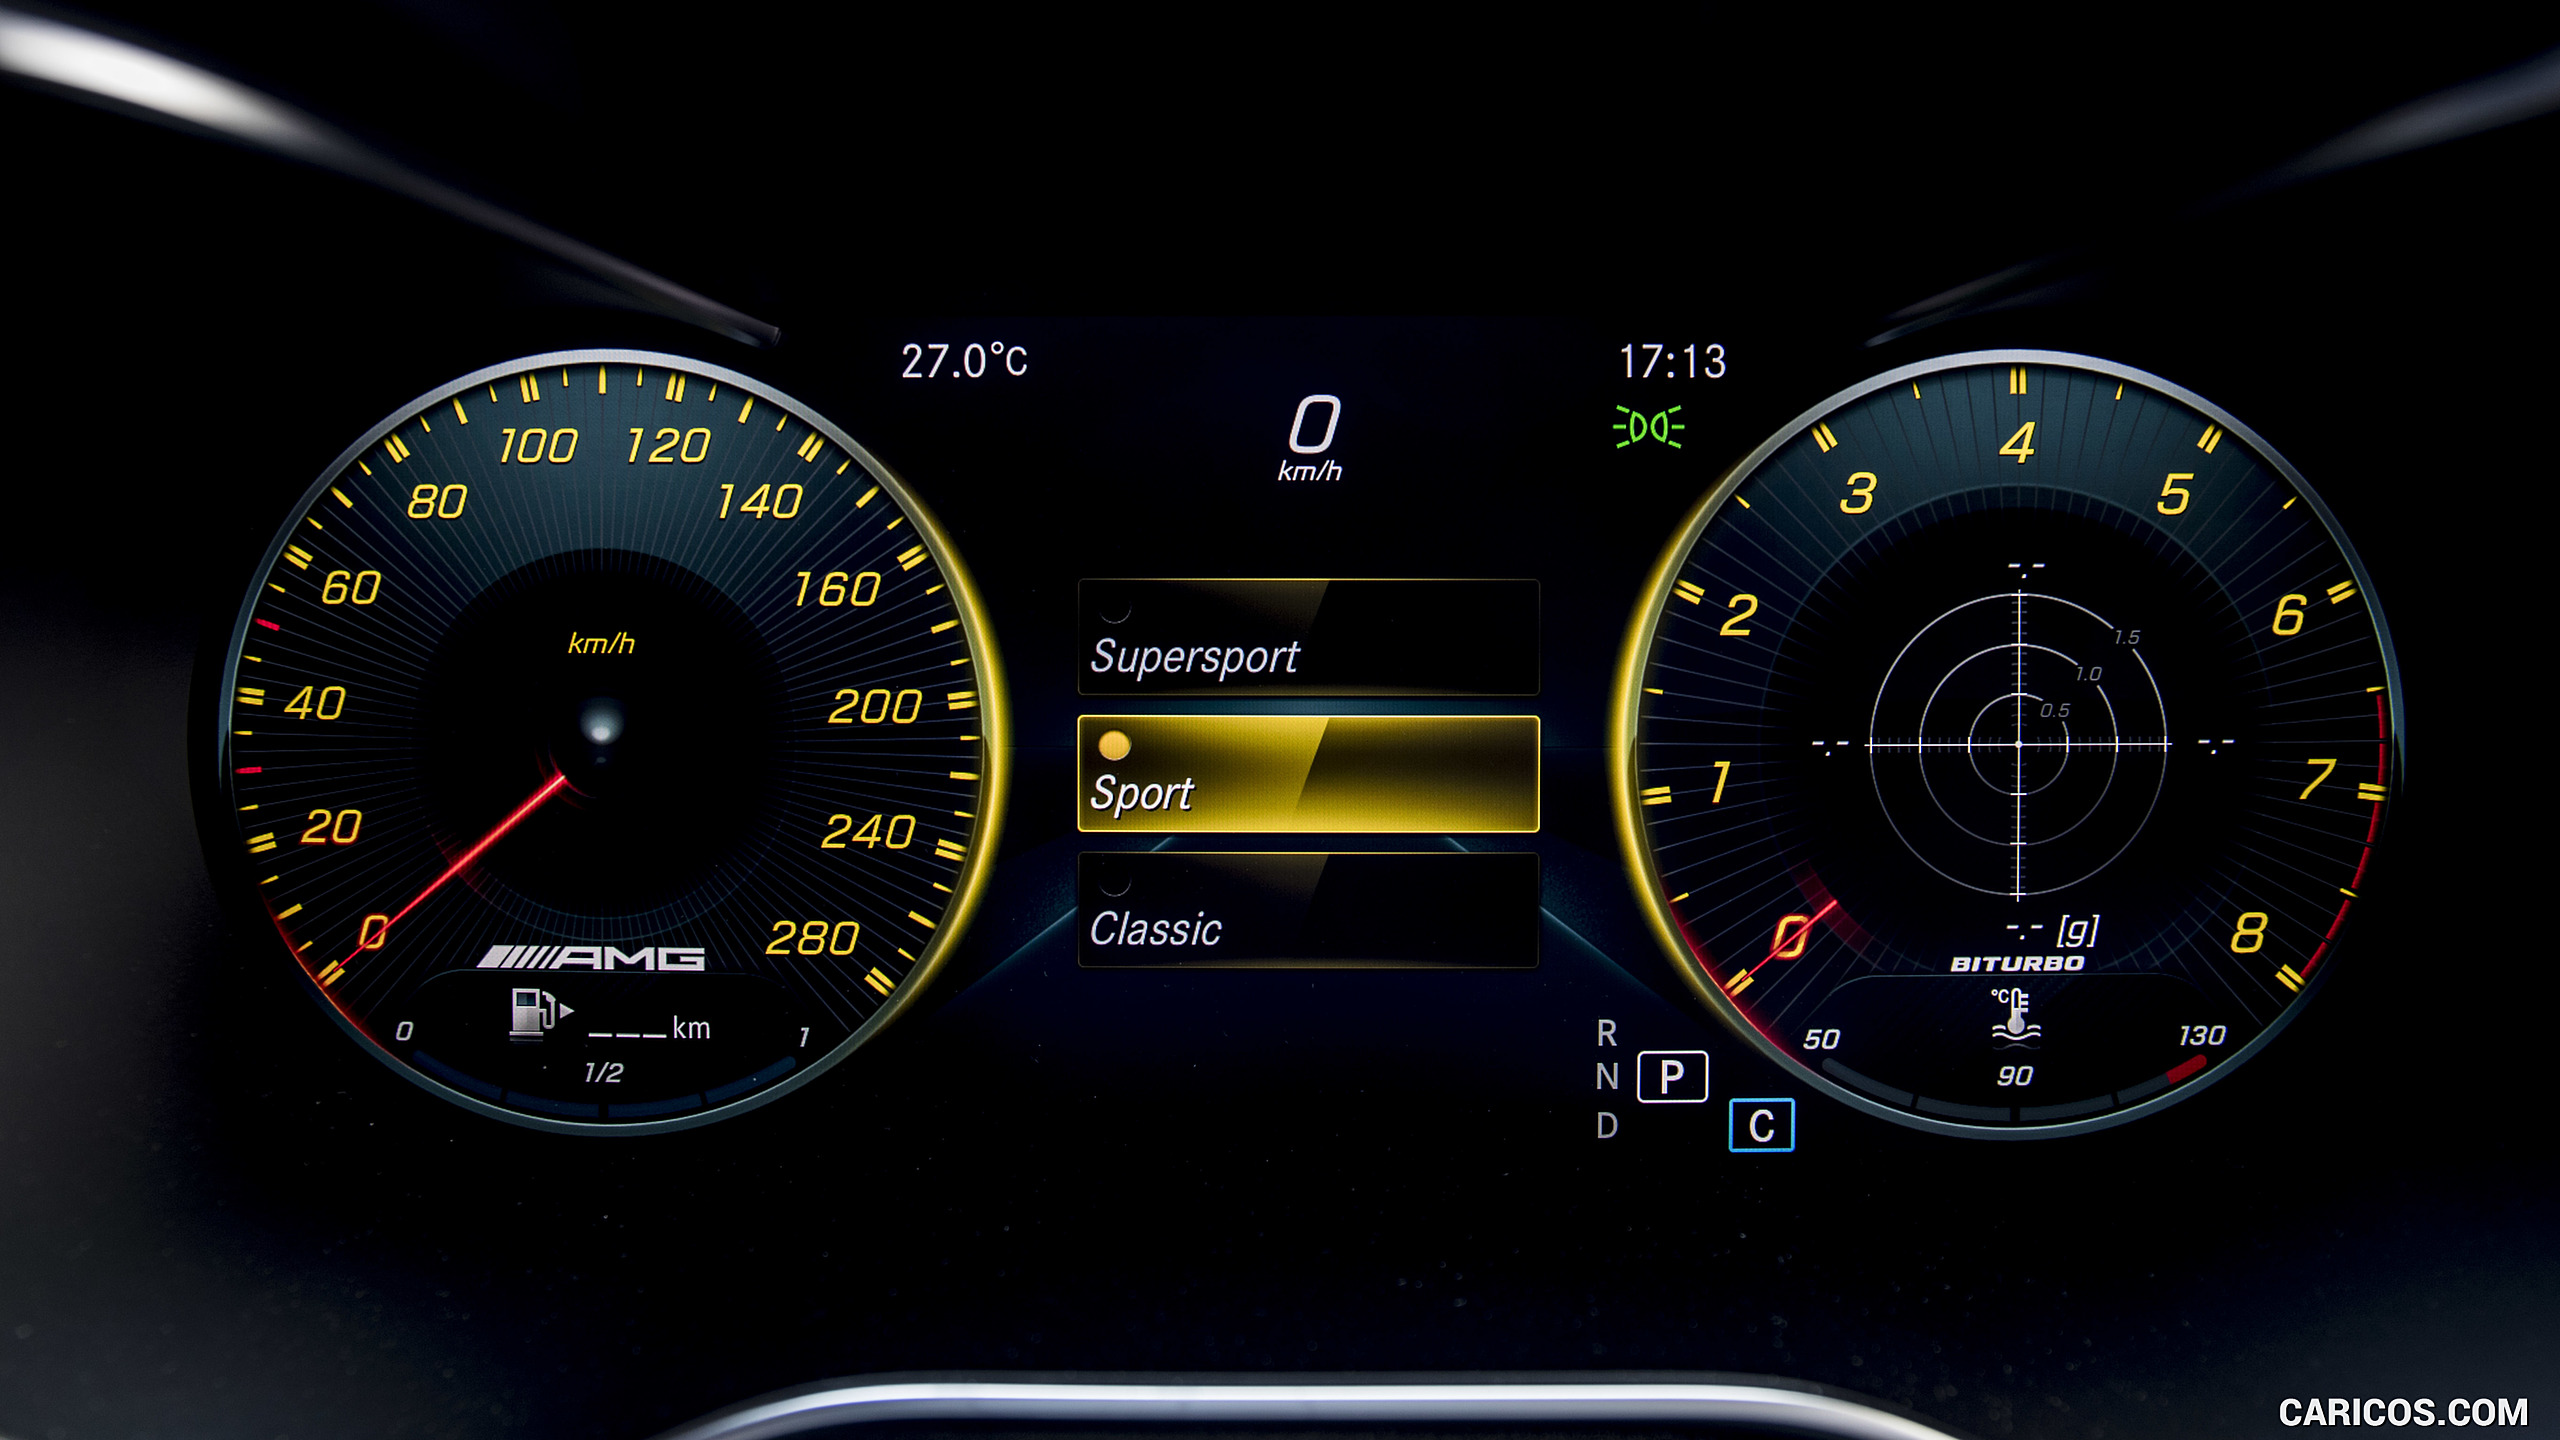 2019 Mercedes-AMG C43 4MATIC Coupe - Digital Instrument Cluster, #103 of 184